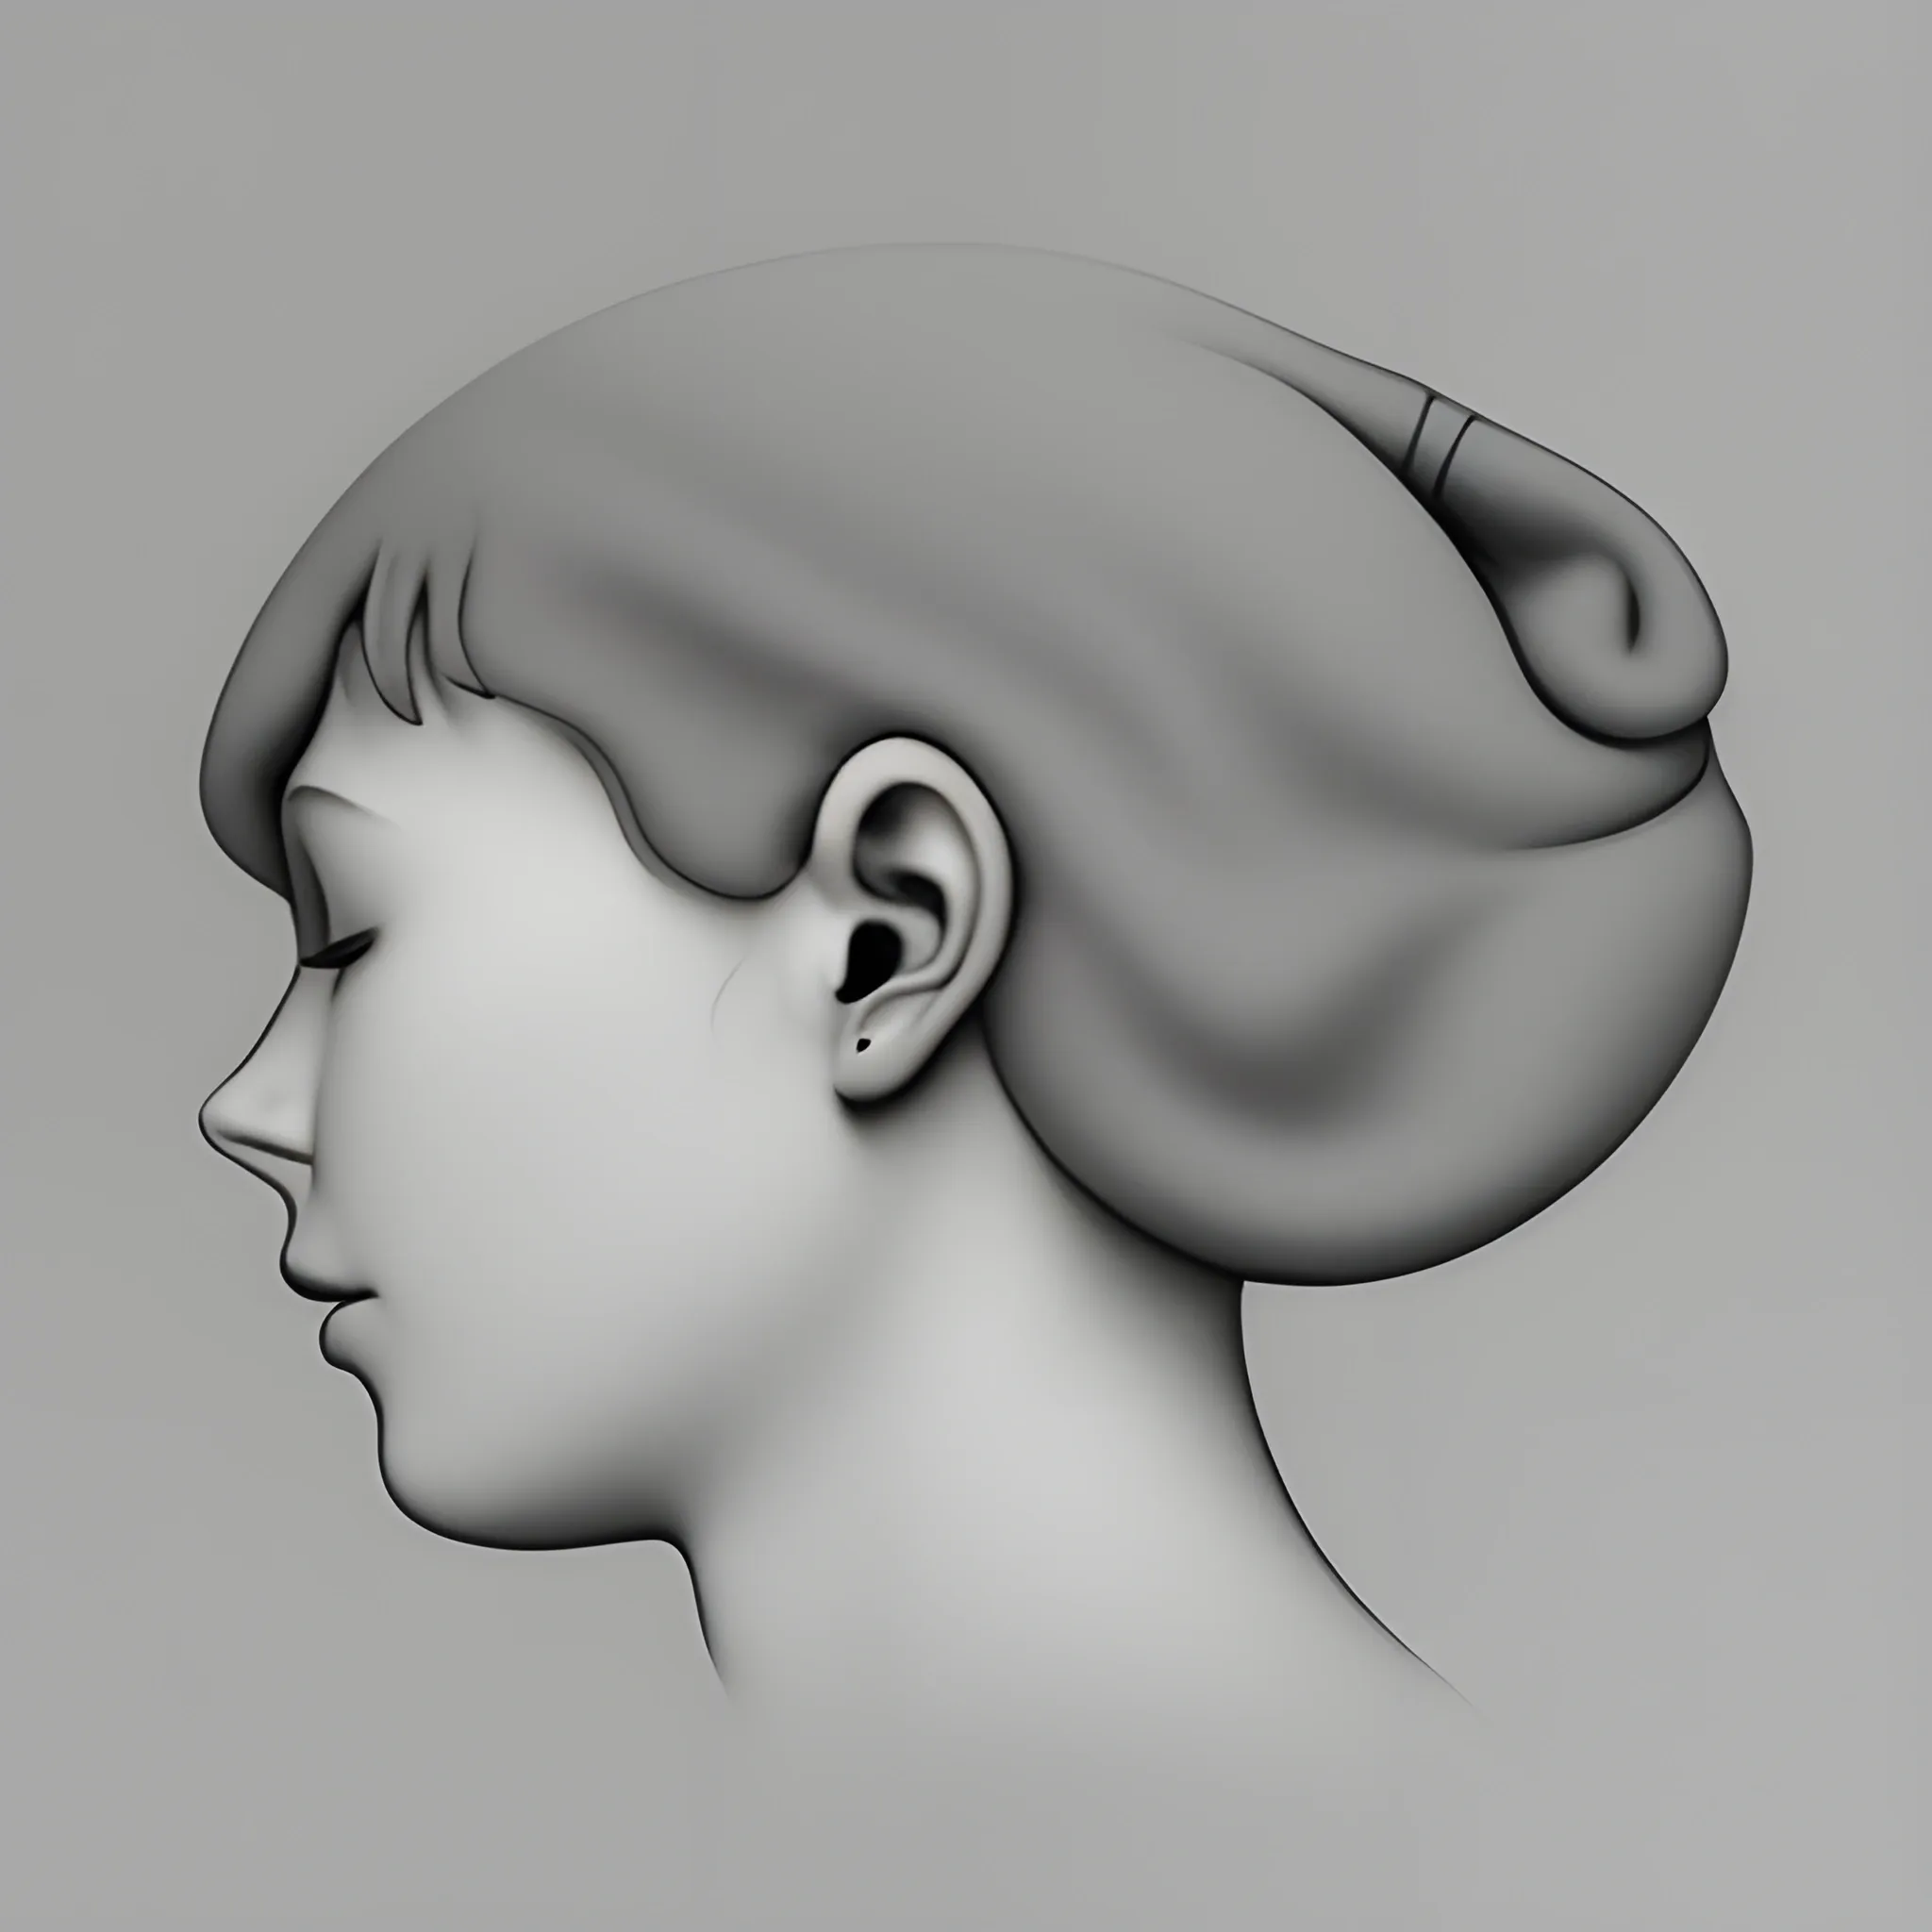 a gray ear in the center of the image without a face, ear close to the camara, full gray background, front point of view, soft light, illustration style